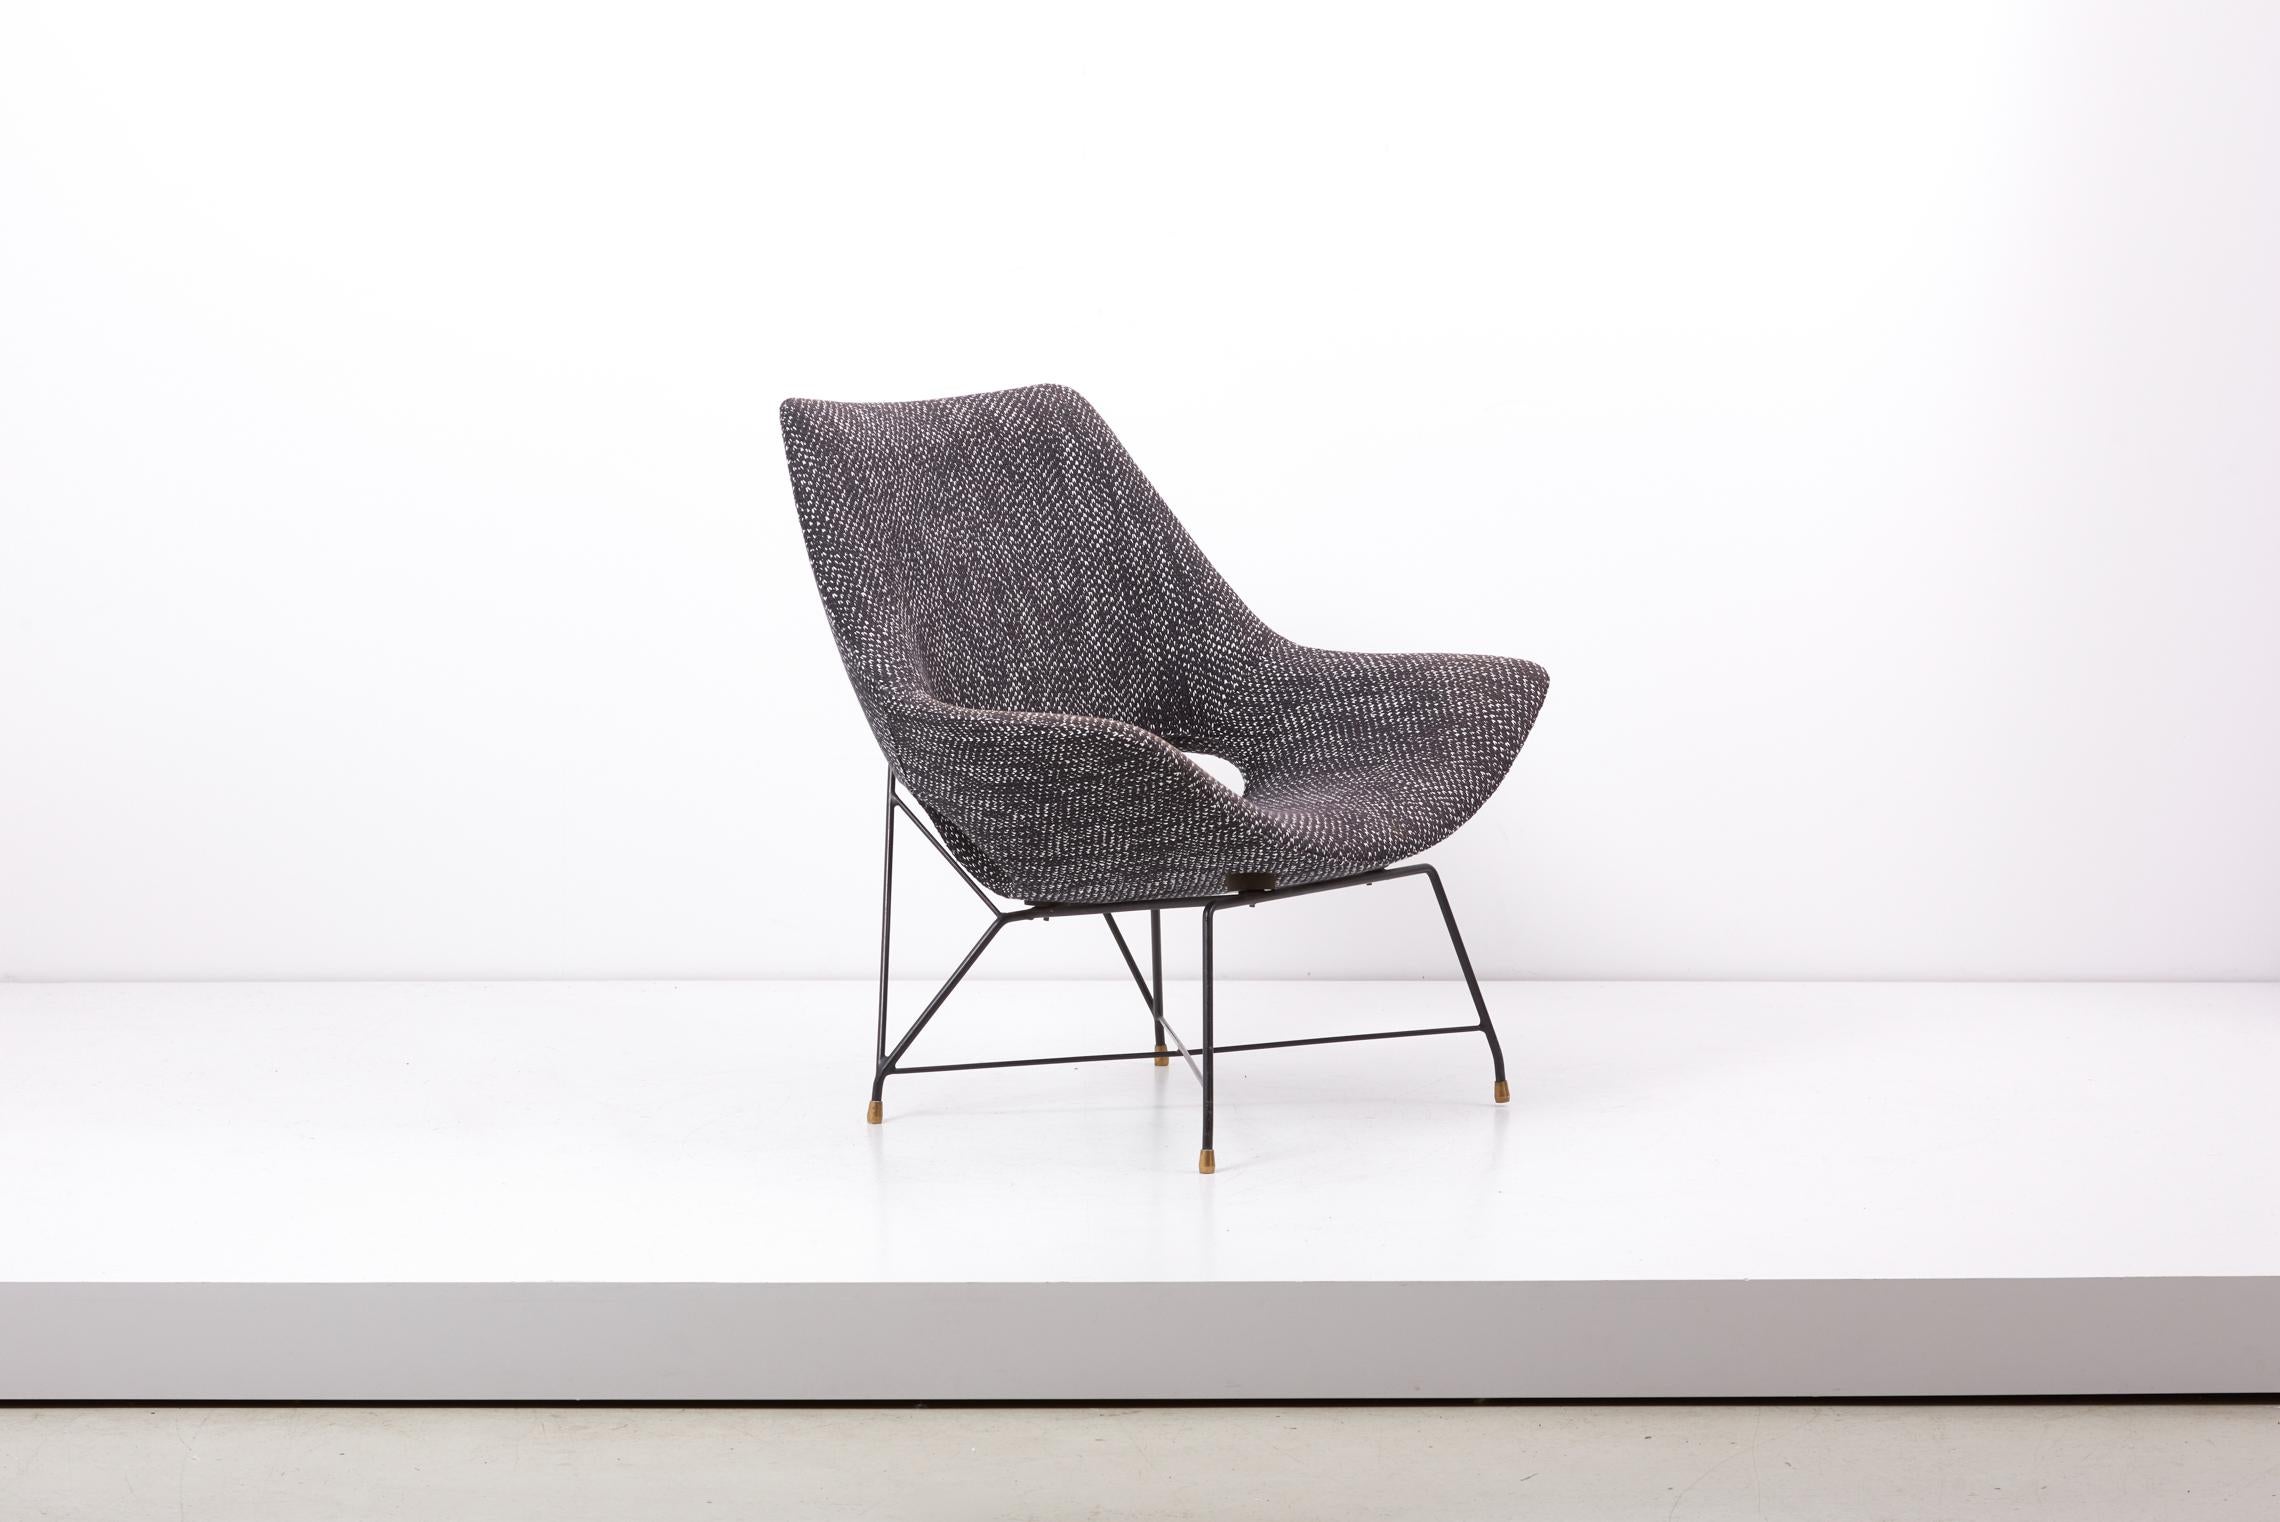 Italian Lounge Chair by Augusto Bozzi for Saporiti in black & white fabric, Italy, 1950s For Sale